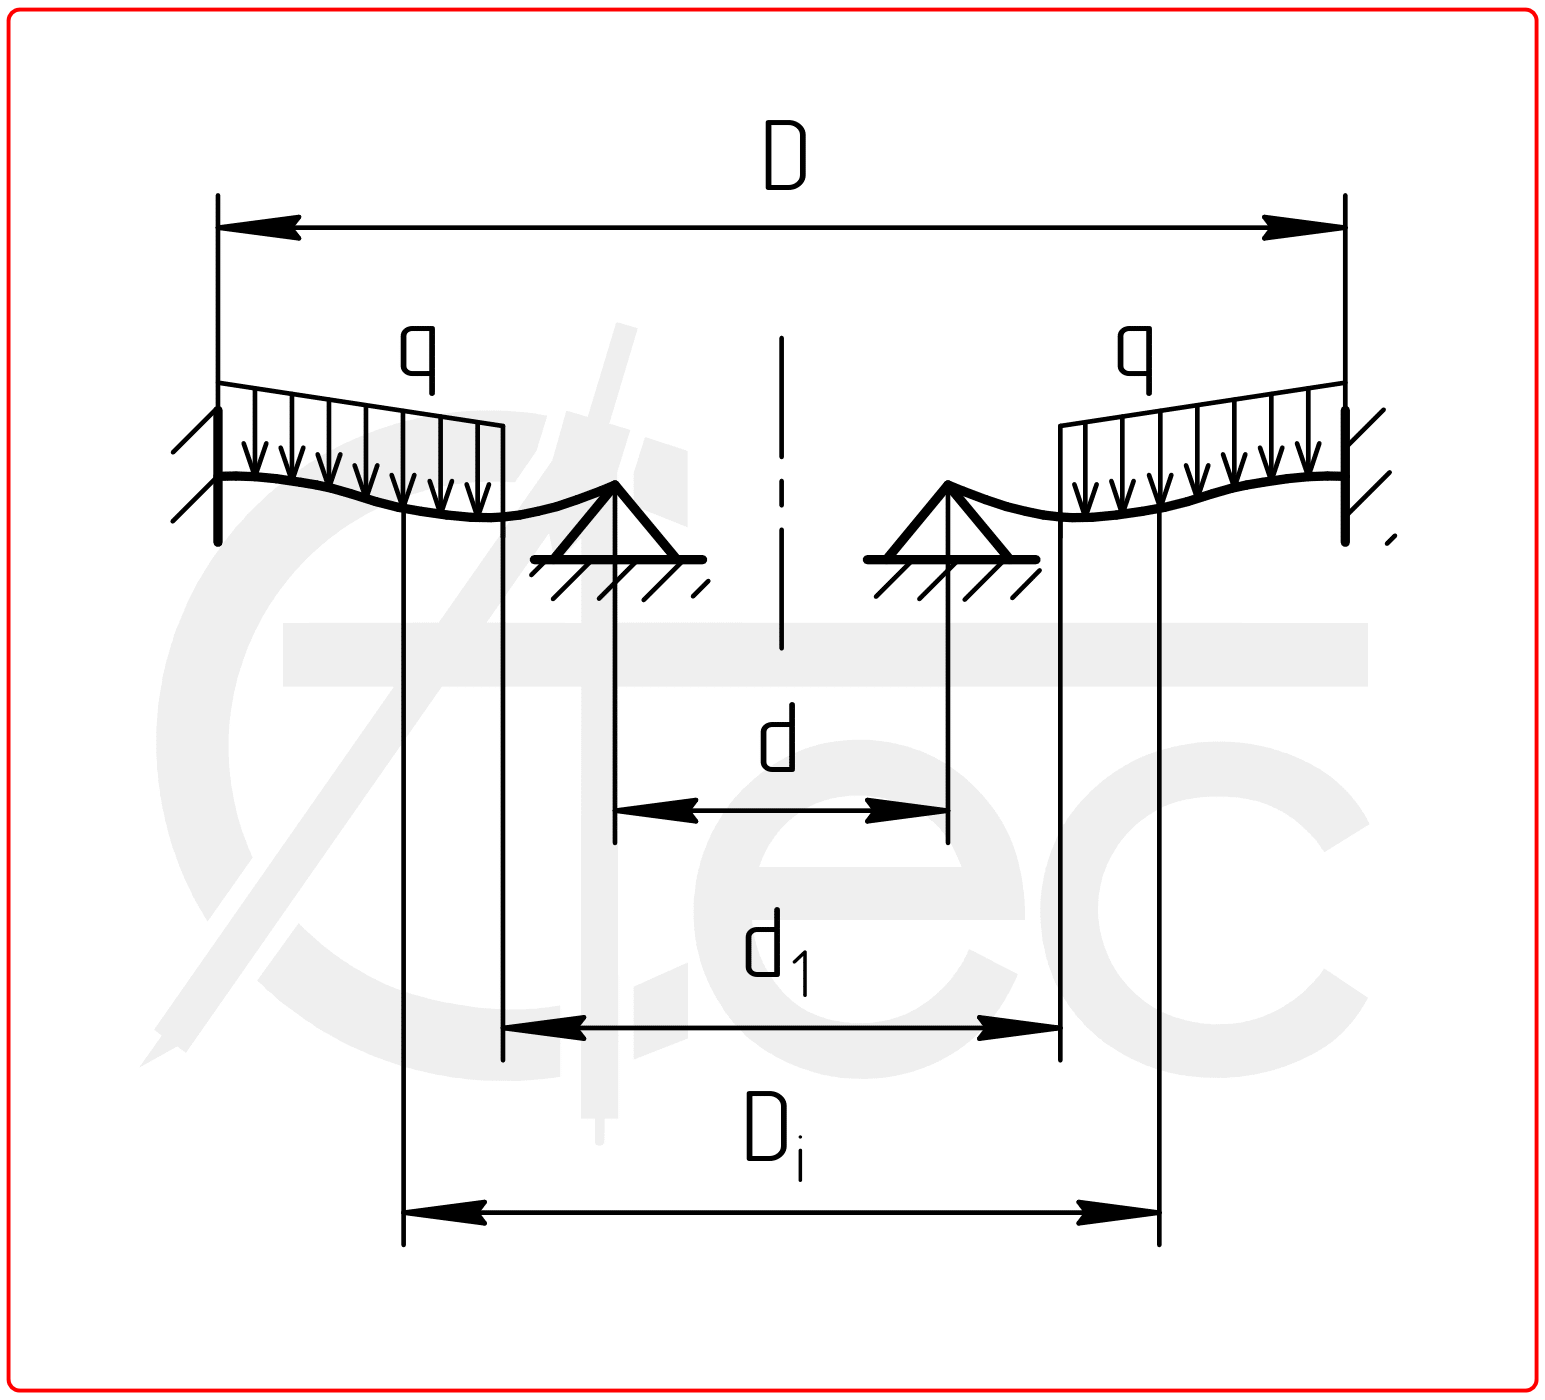 Circle plate with outer edge fixed and inner edge simply supported under uniform load